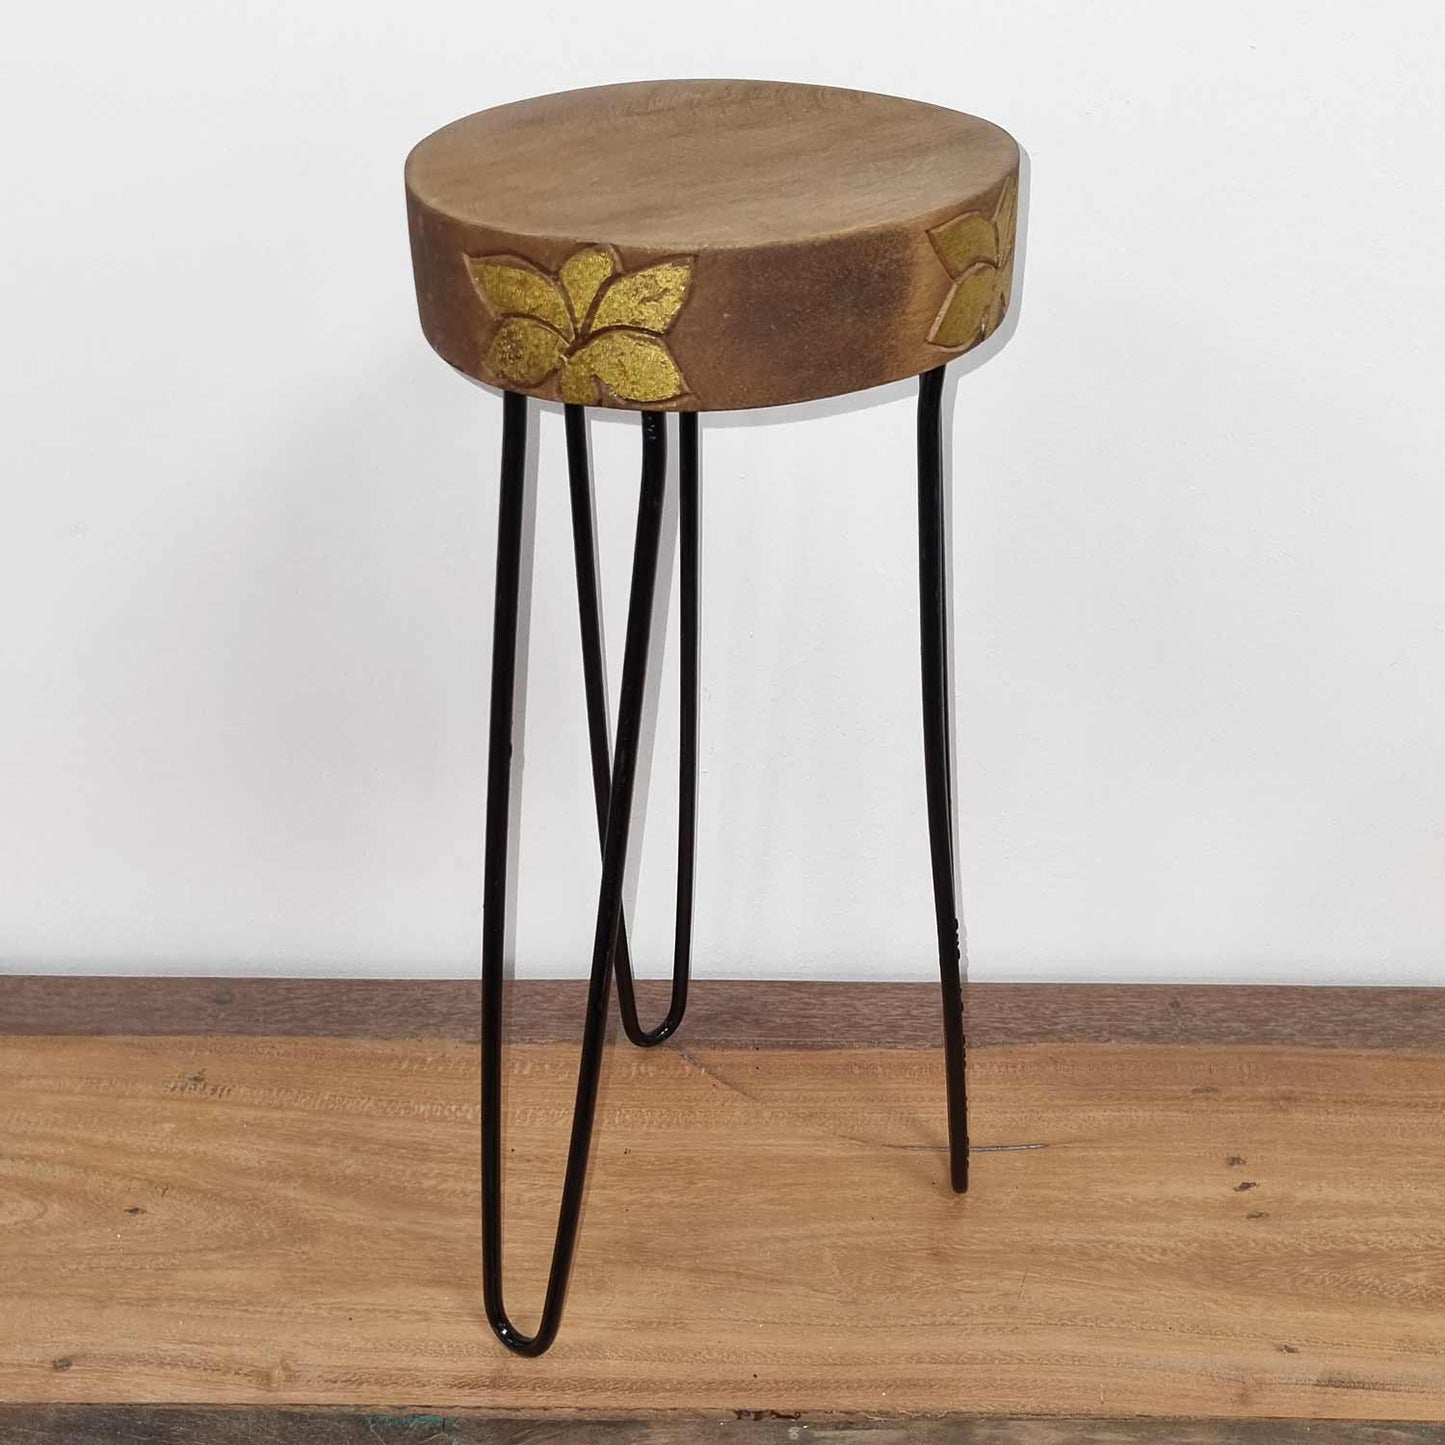 Albasia Wood Plant Stands - ShopGreenToday